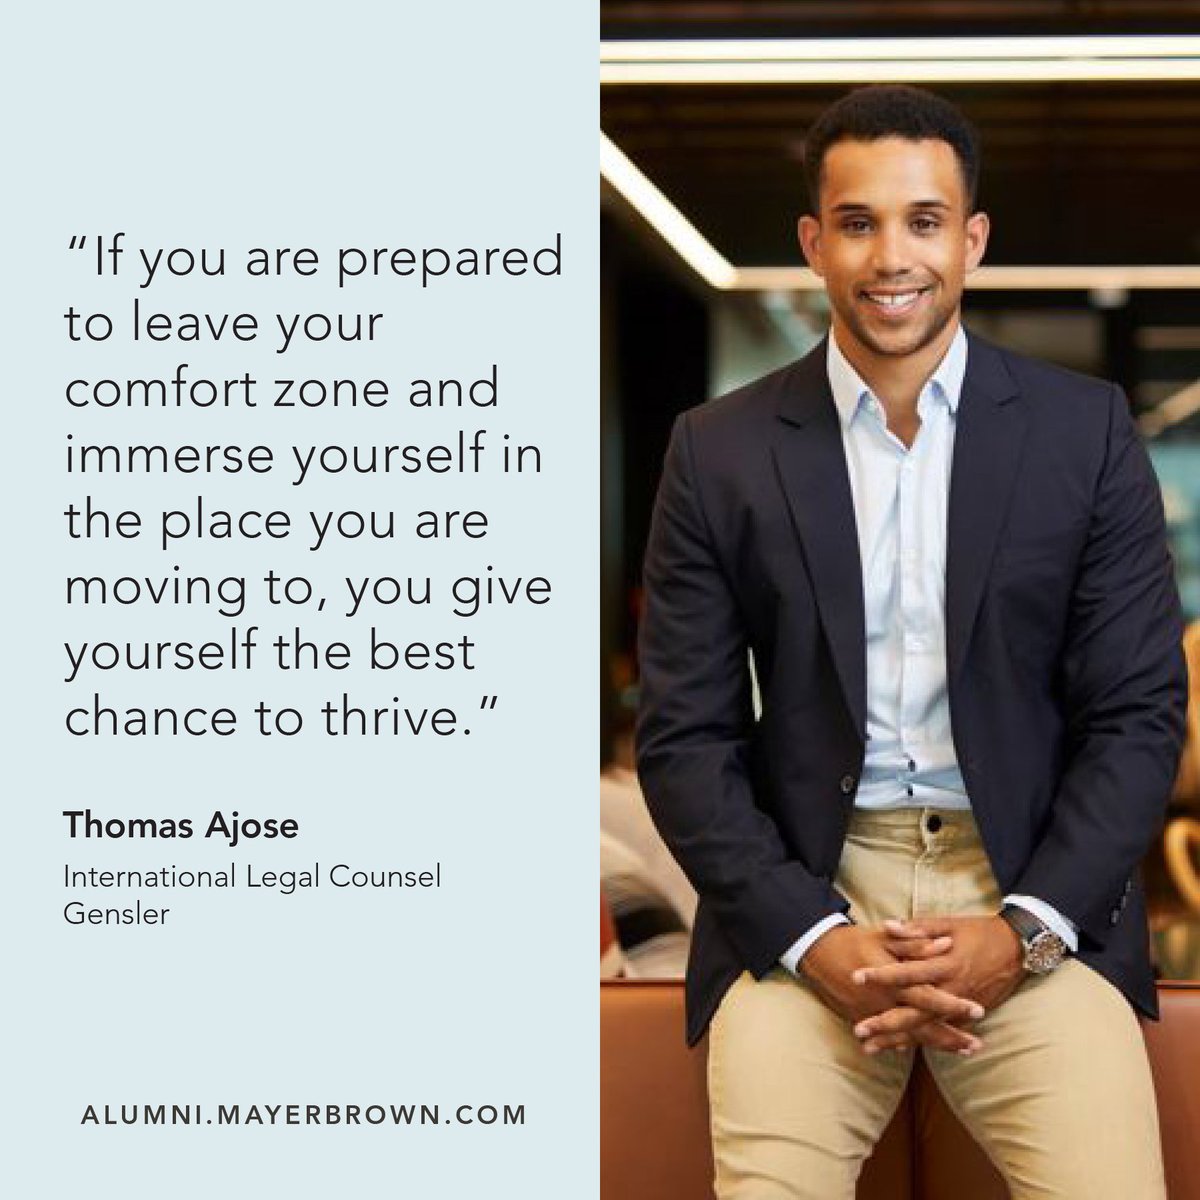 Mayer Brown alumnus Thomas Ajose left the firm’s London office in 2021 to join global design and architecture firm Gensler in Singapore. Read his advice for others looking to work and live in another country at: bit.ly/3Fs4pWw #MayerBrownAlumni